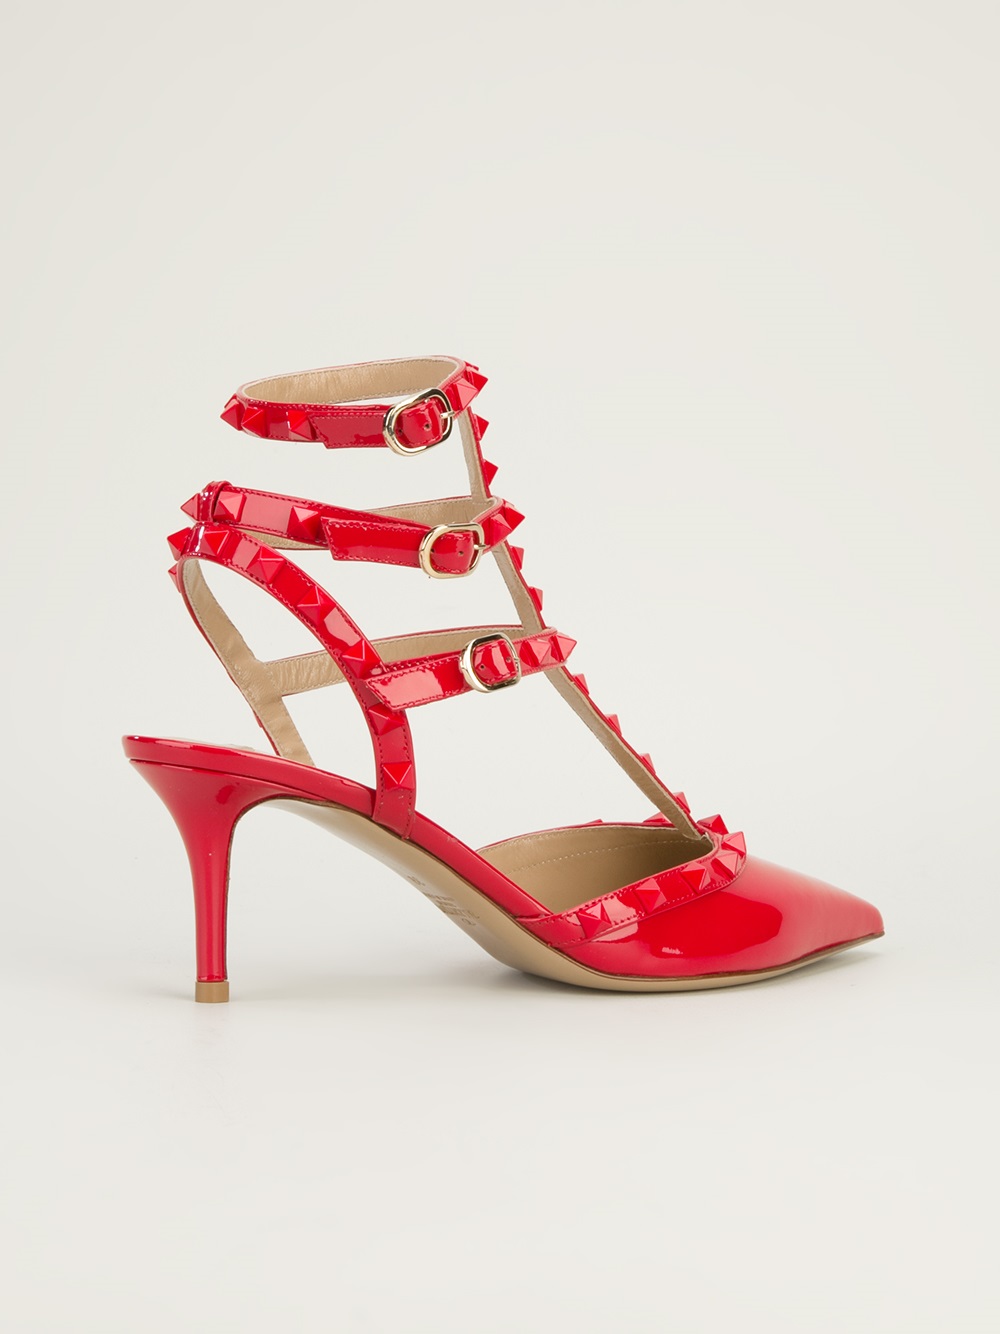  Valentino  Studded Mid Heel  Sandal  in Red Lyst